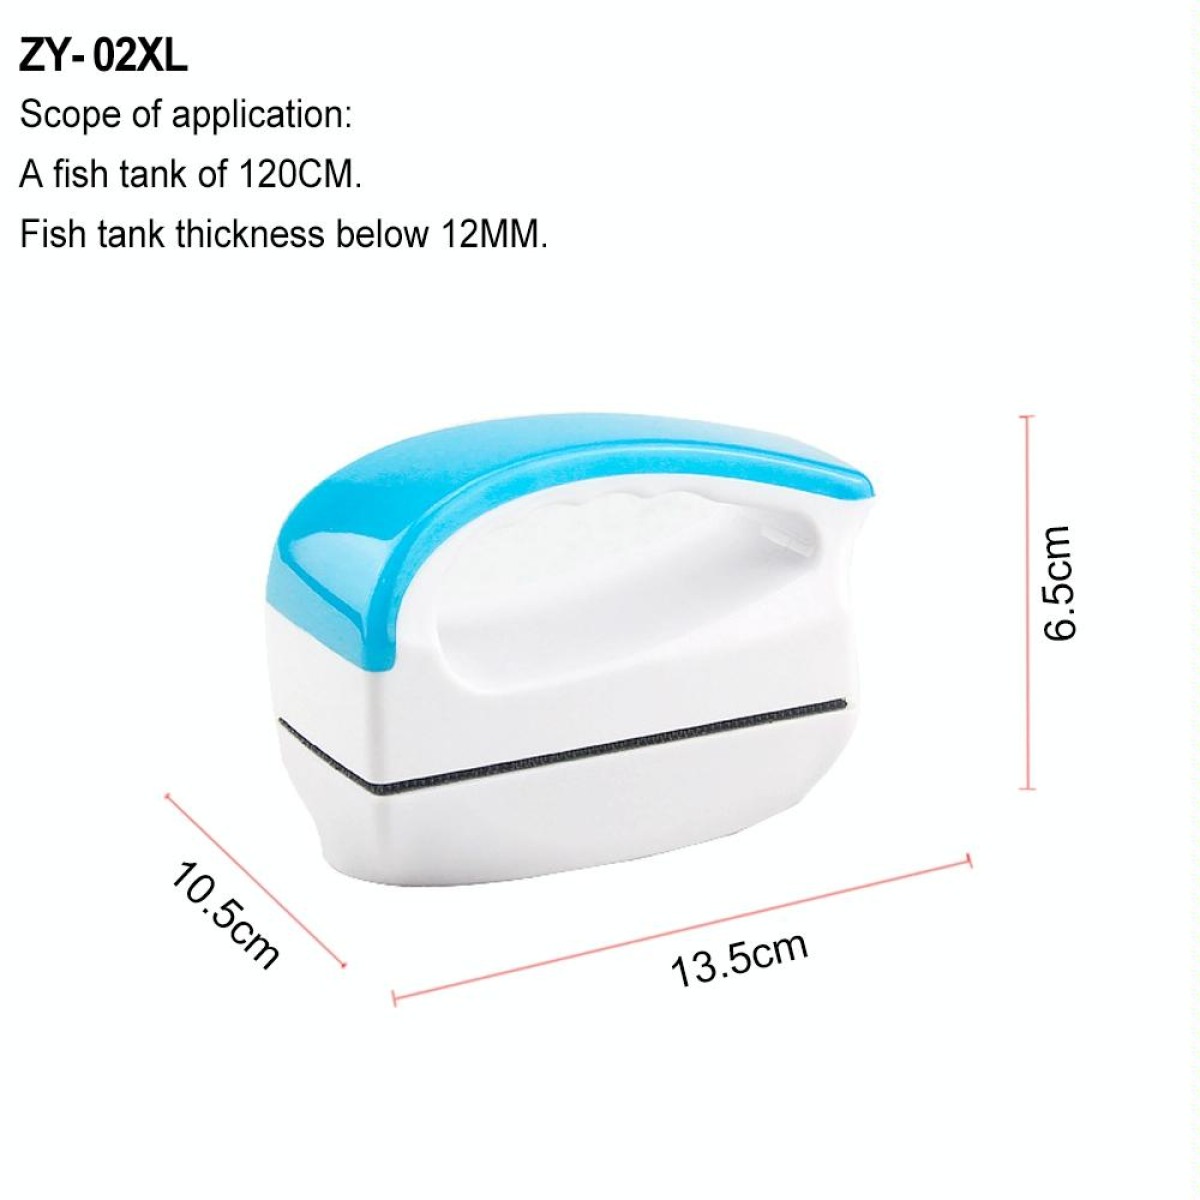 ZY-02XL Aquarium Fish Tank Suspended Handle Design Magnetic Cleaner Brush Cleaning Tools, XL, Size: 13.5*10.5*6.5cm